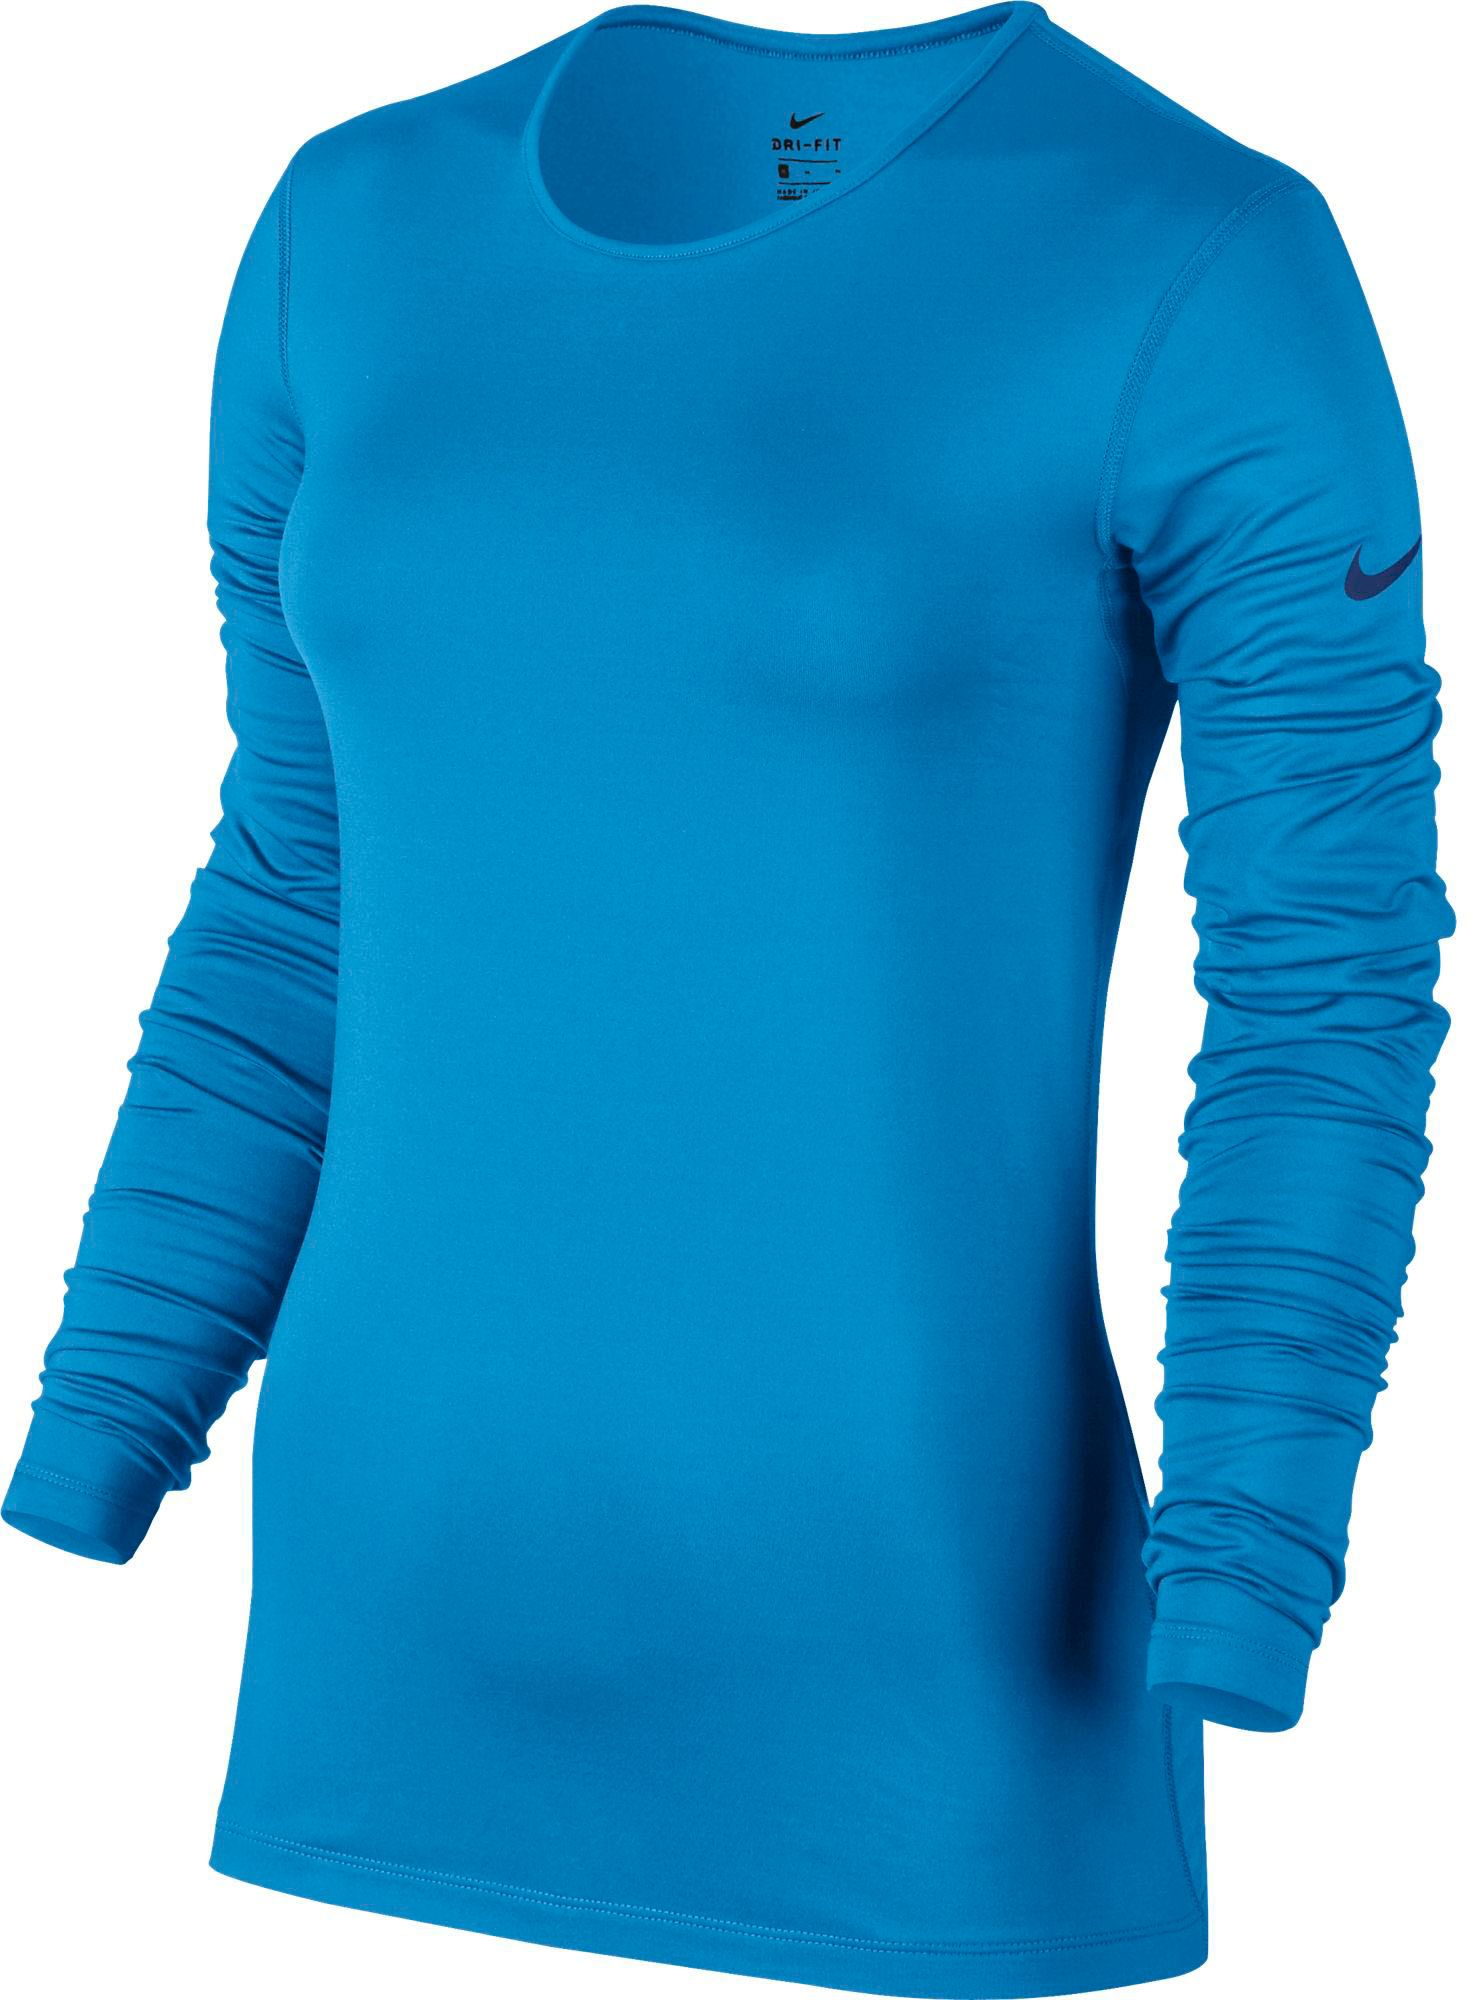 Women's Compression Shirts & Tops | DICK'S Sporting Goods